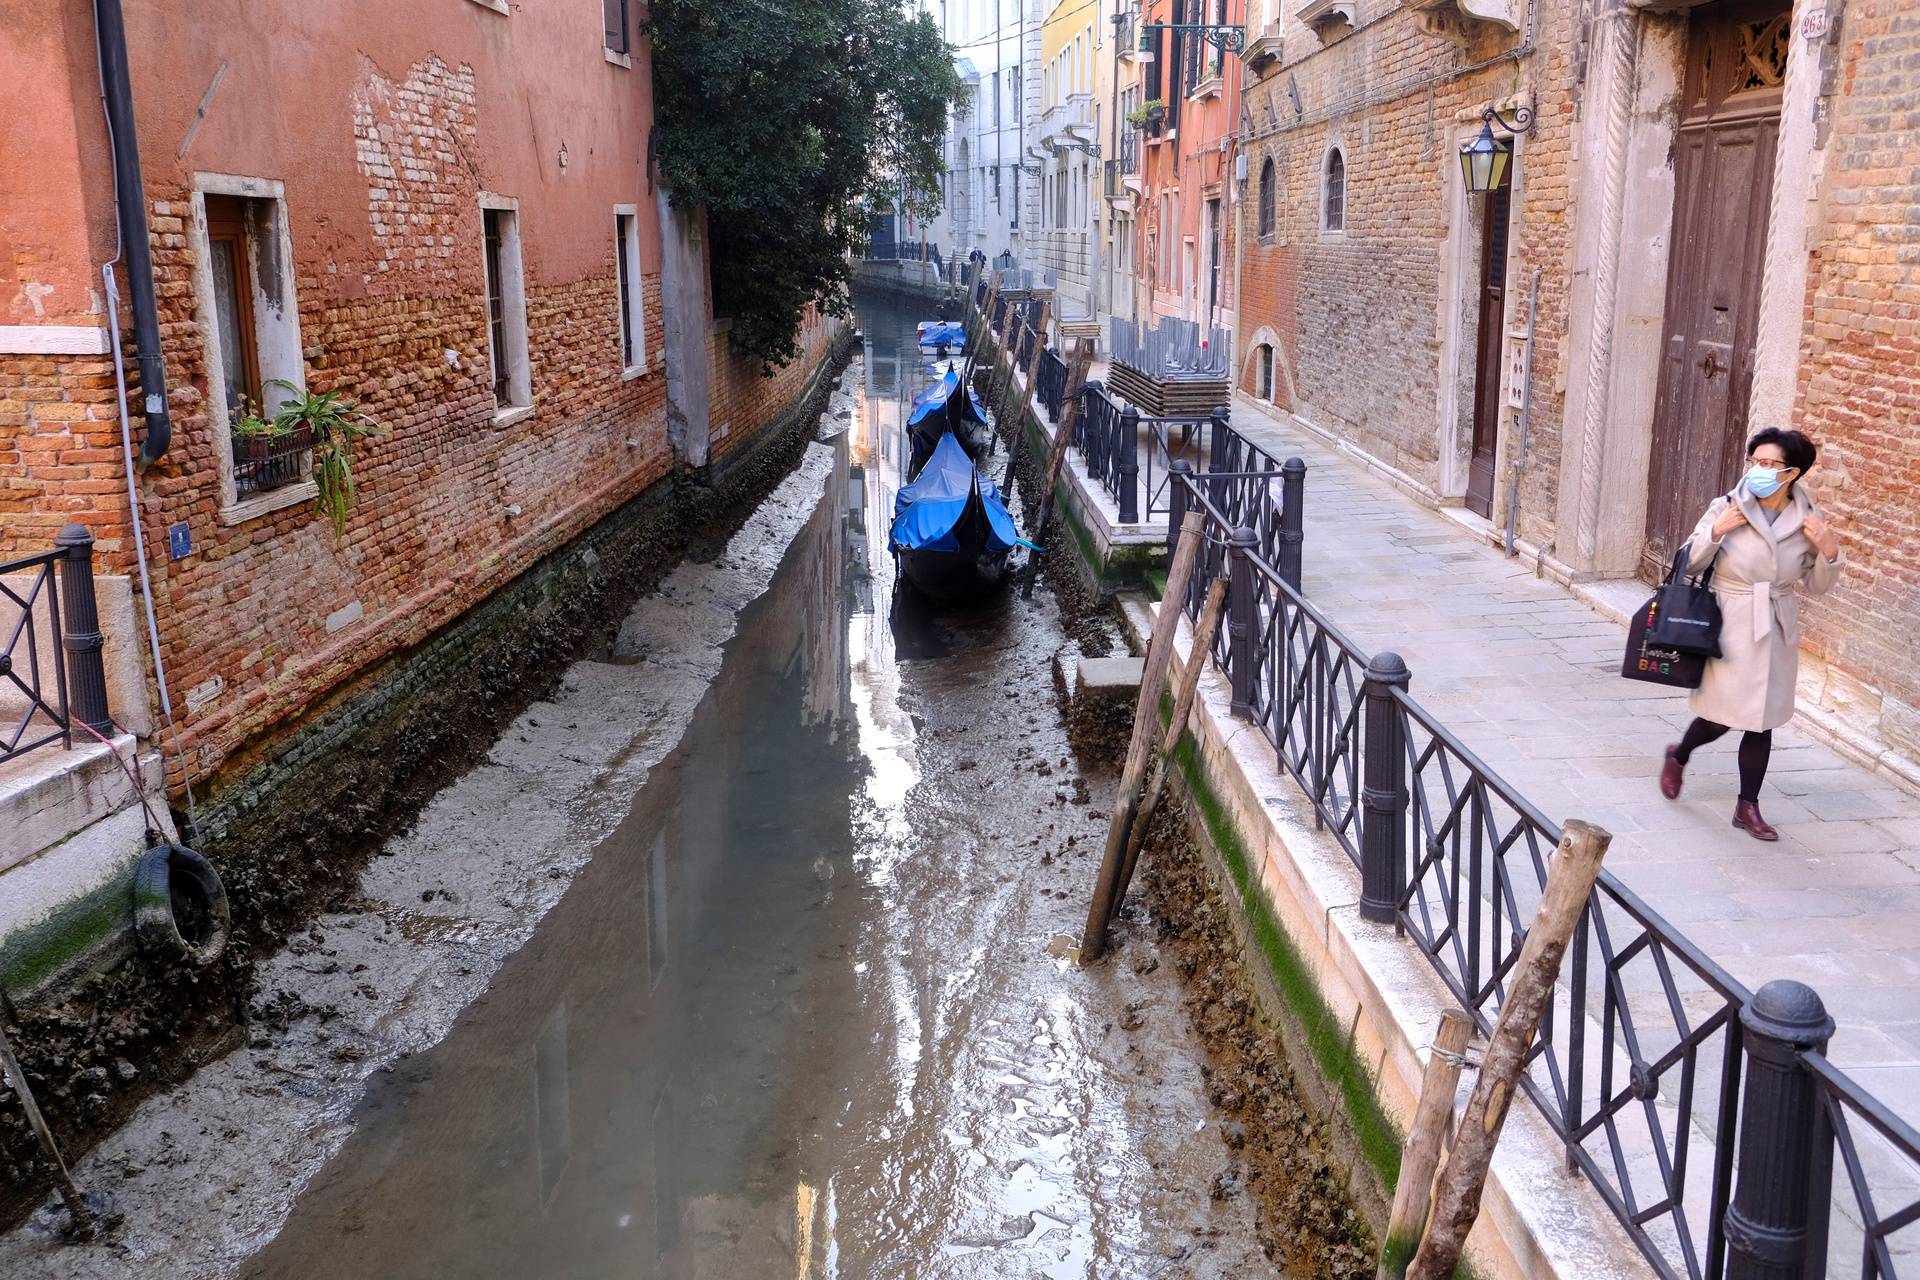 Gondolas are seen in a canal during an exceptionally low tide in the lagoon city of Venice